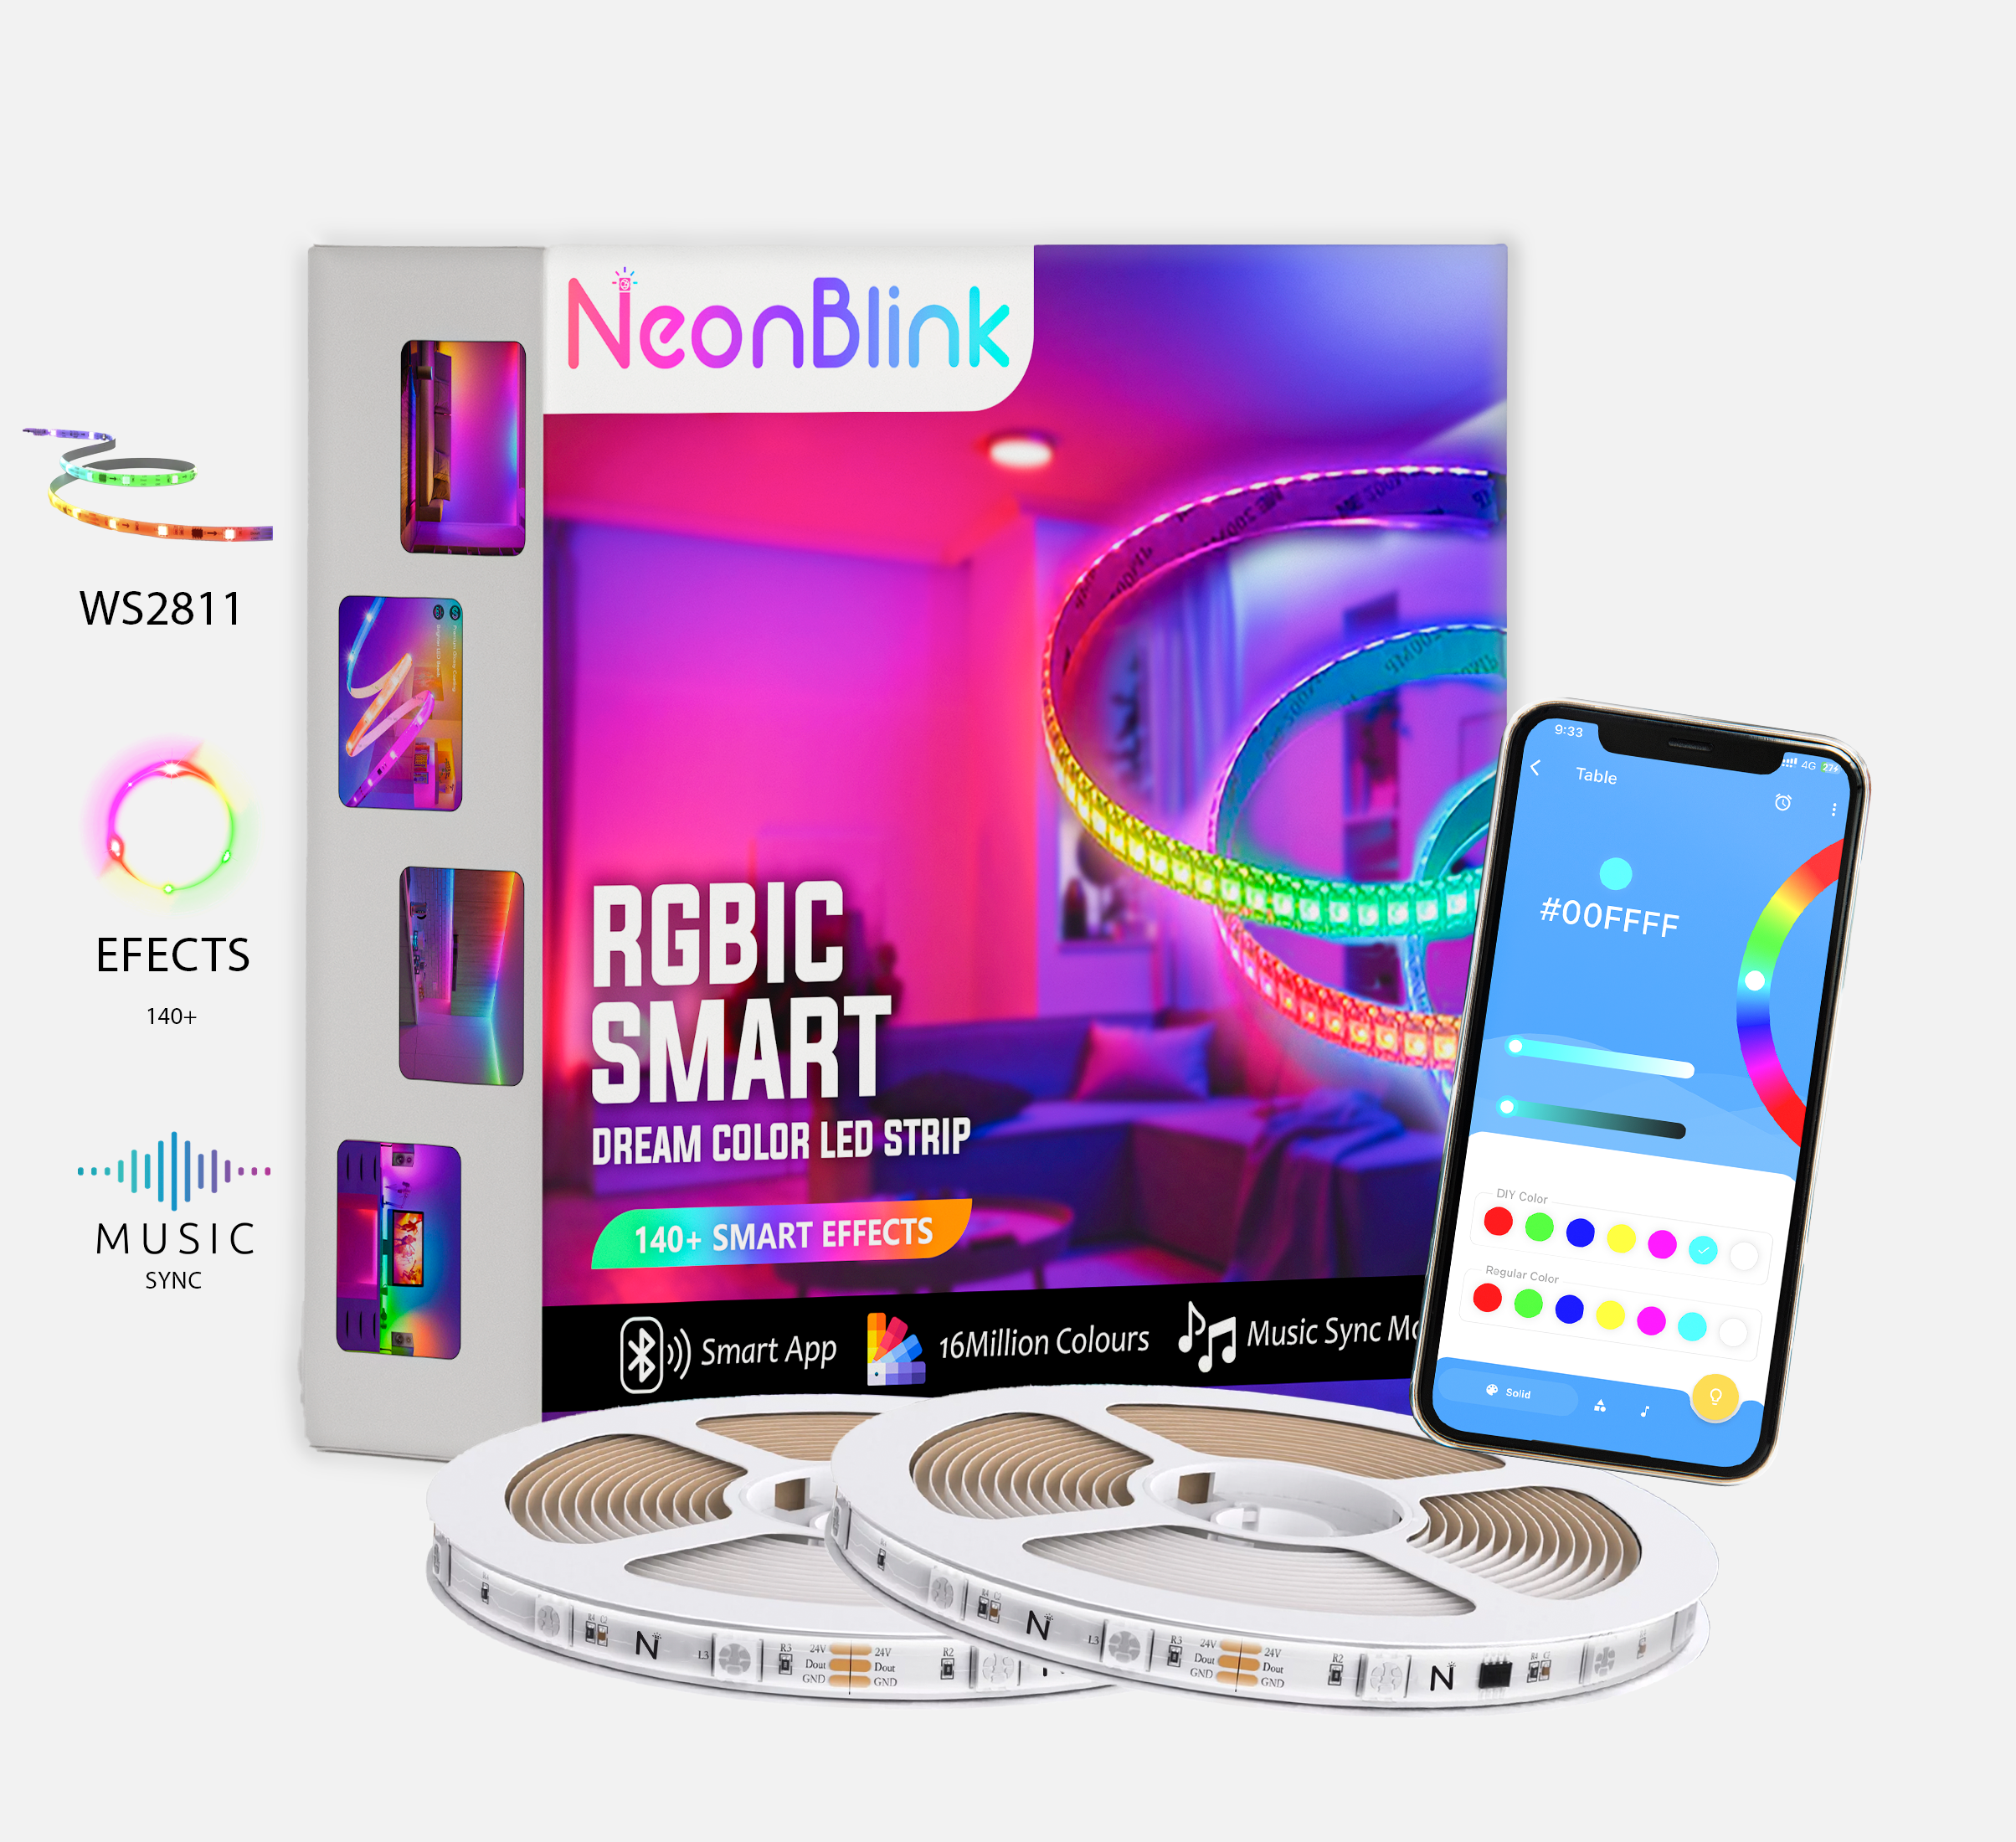 NeonBlink RGBIC LED Strip (Music Sync & App Support)